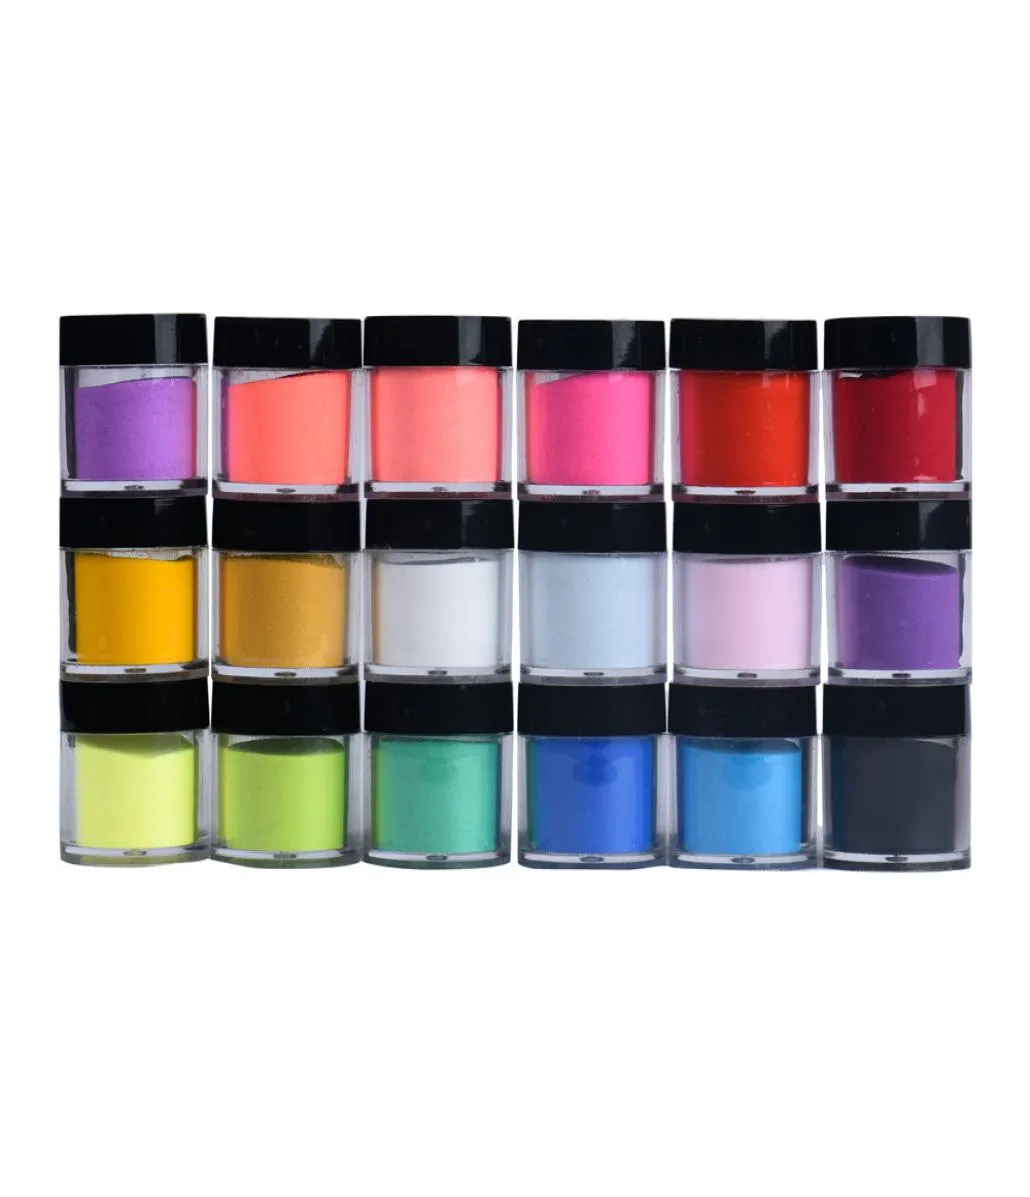 Professional 18 Colors Acrylic Nail Art Tips UV Gel Carving Crystal Powder Dust Design 3D Manicure Decoration Set Beauty6339869